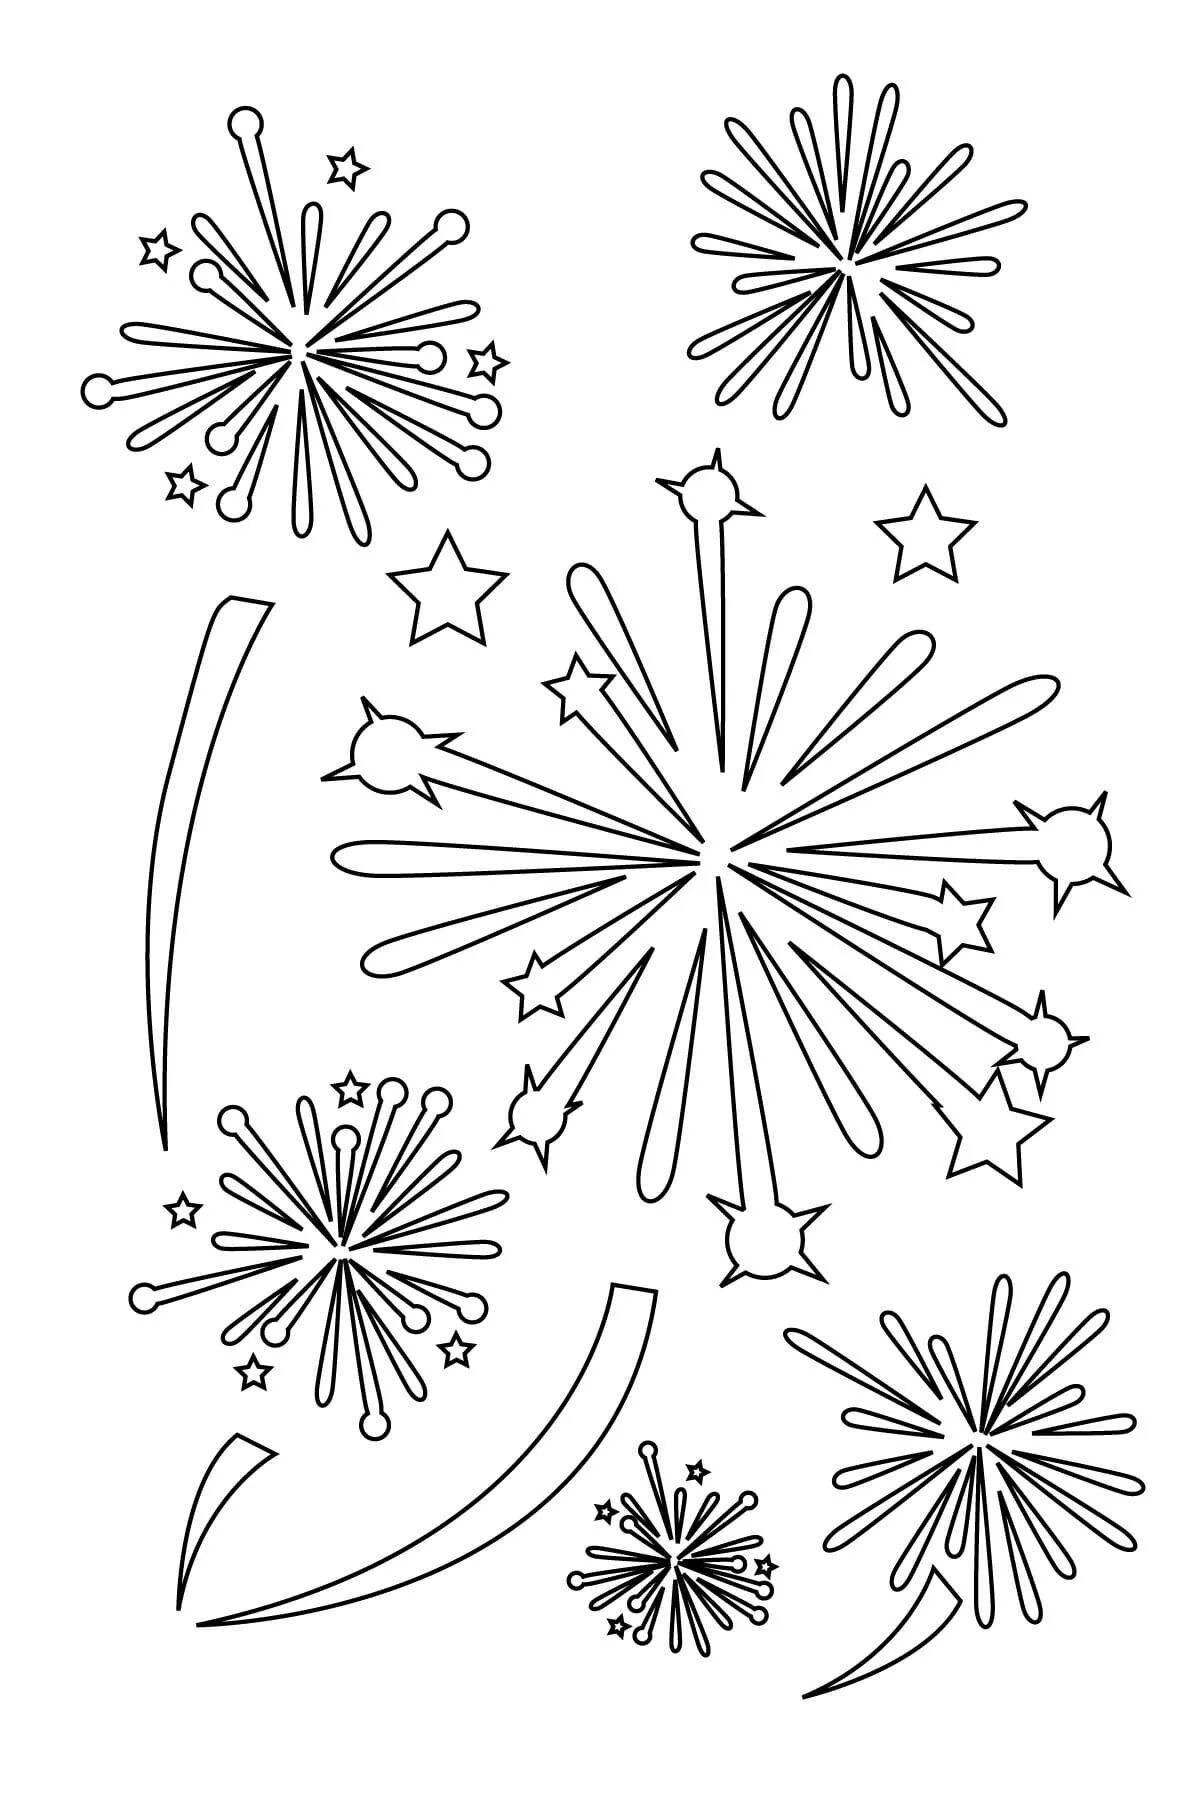 Awesome fireworks coloring pages for kids